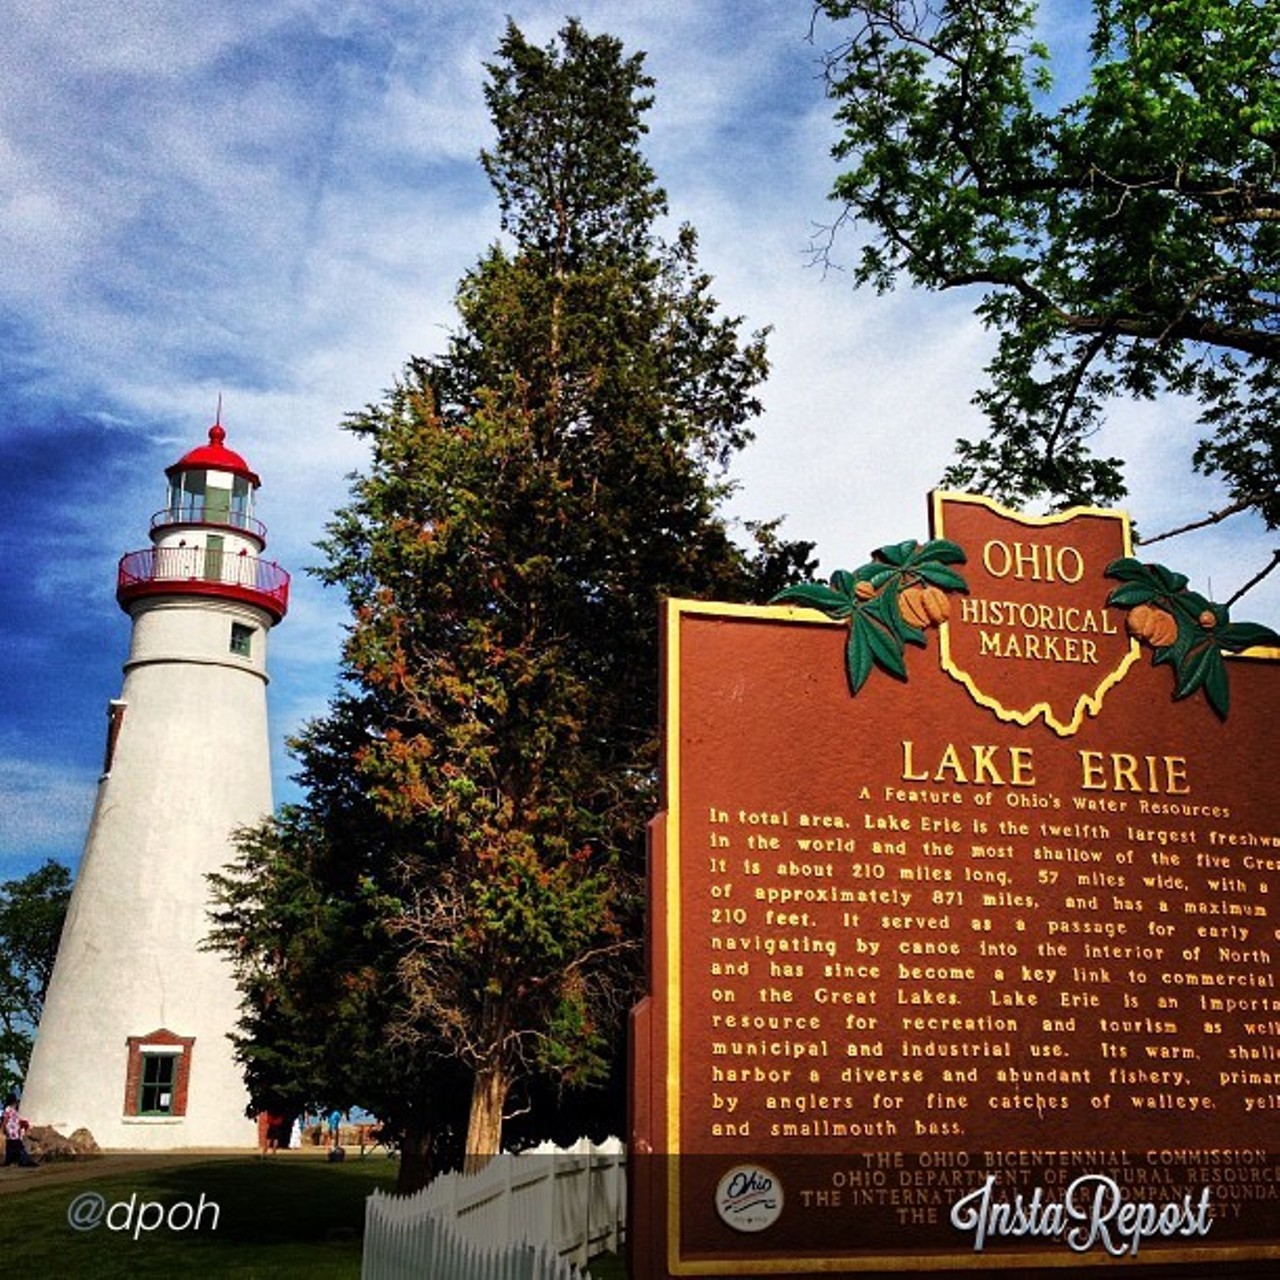 Looking for a cozy fall weekend getaway? The village of Marblehead offers a quiet, small town vibe with plenty of activities! Check out the lighthouse and LaFarge Quarry for unique views of fall foliage.